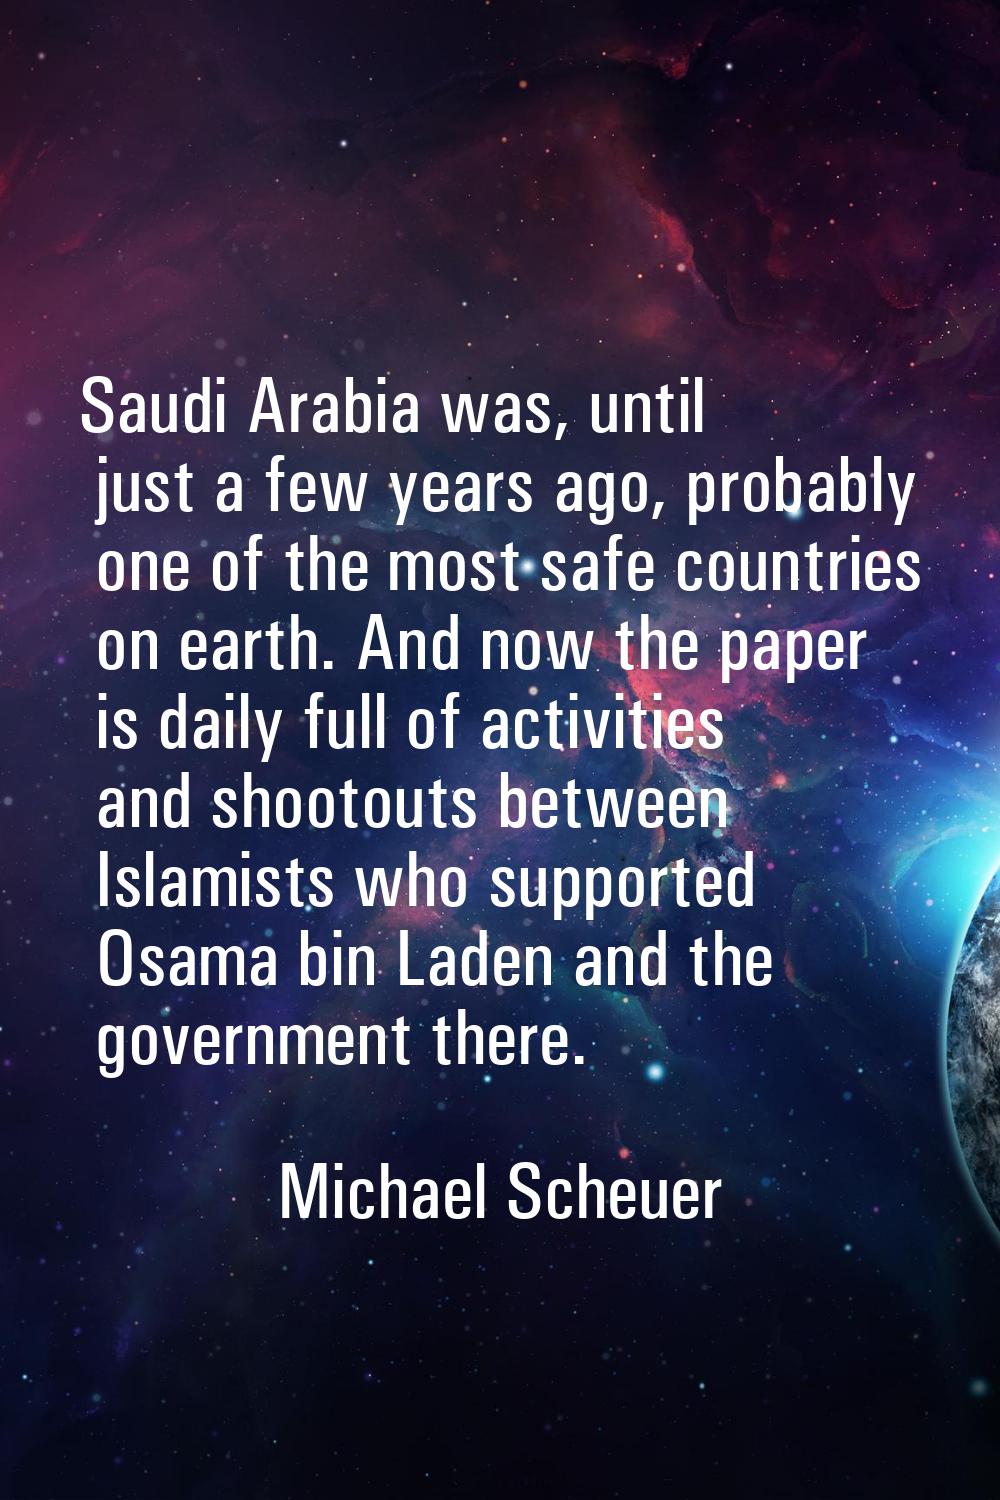 Saudi Arabia was, until just a few years ago, probably one of the most safe countries on earth. And